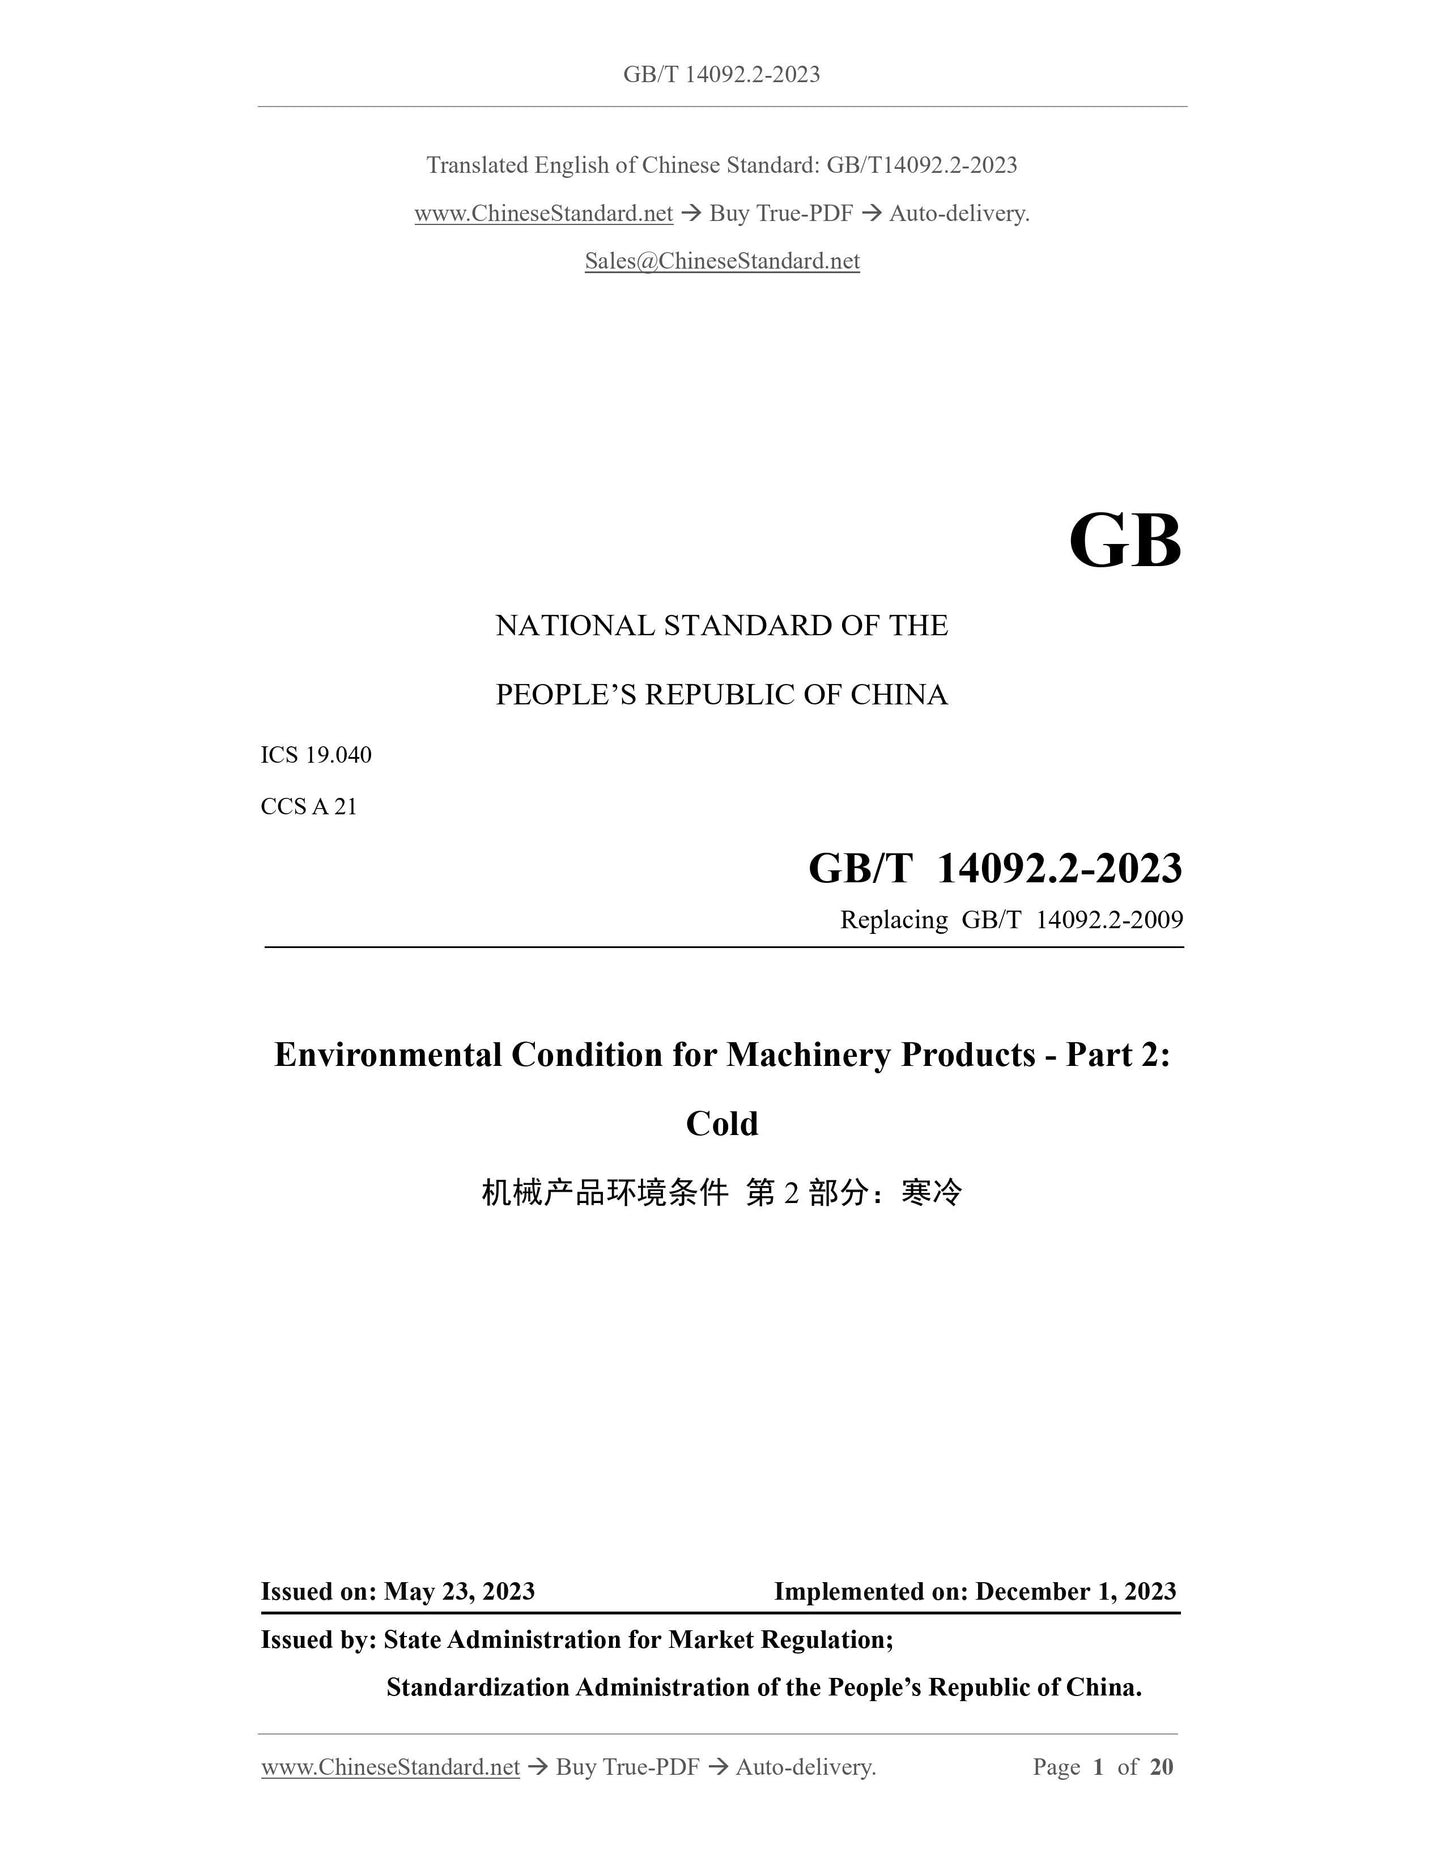 GB/T 14092.2-2023 Page 1